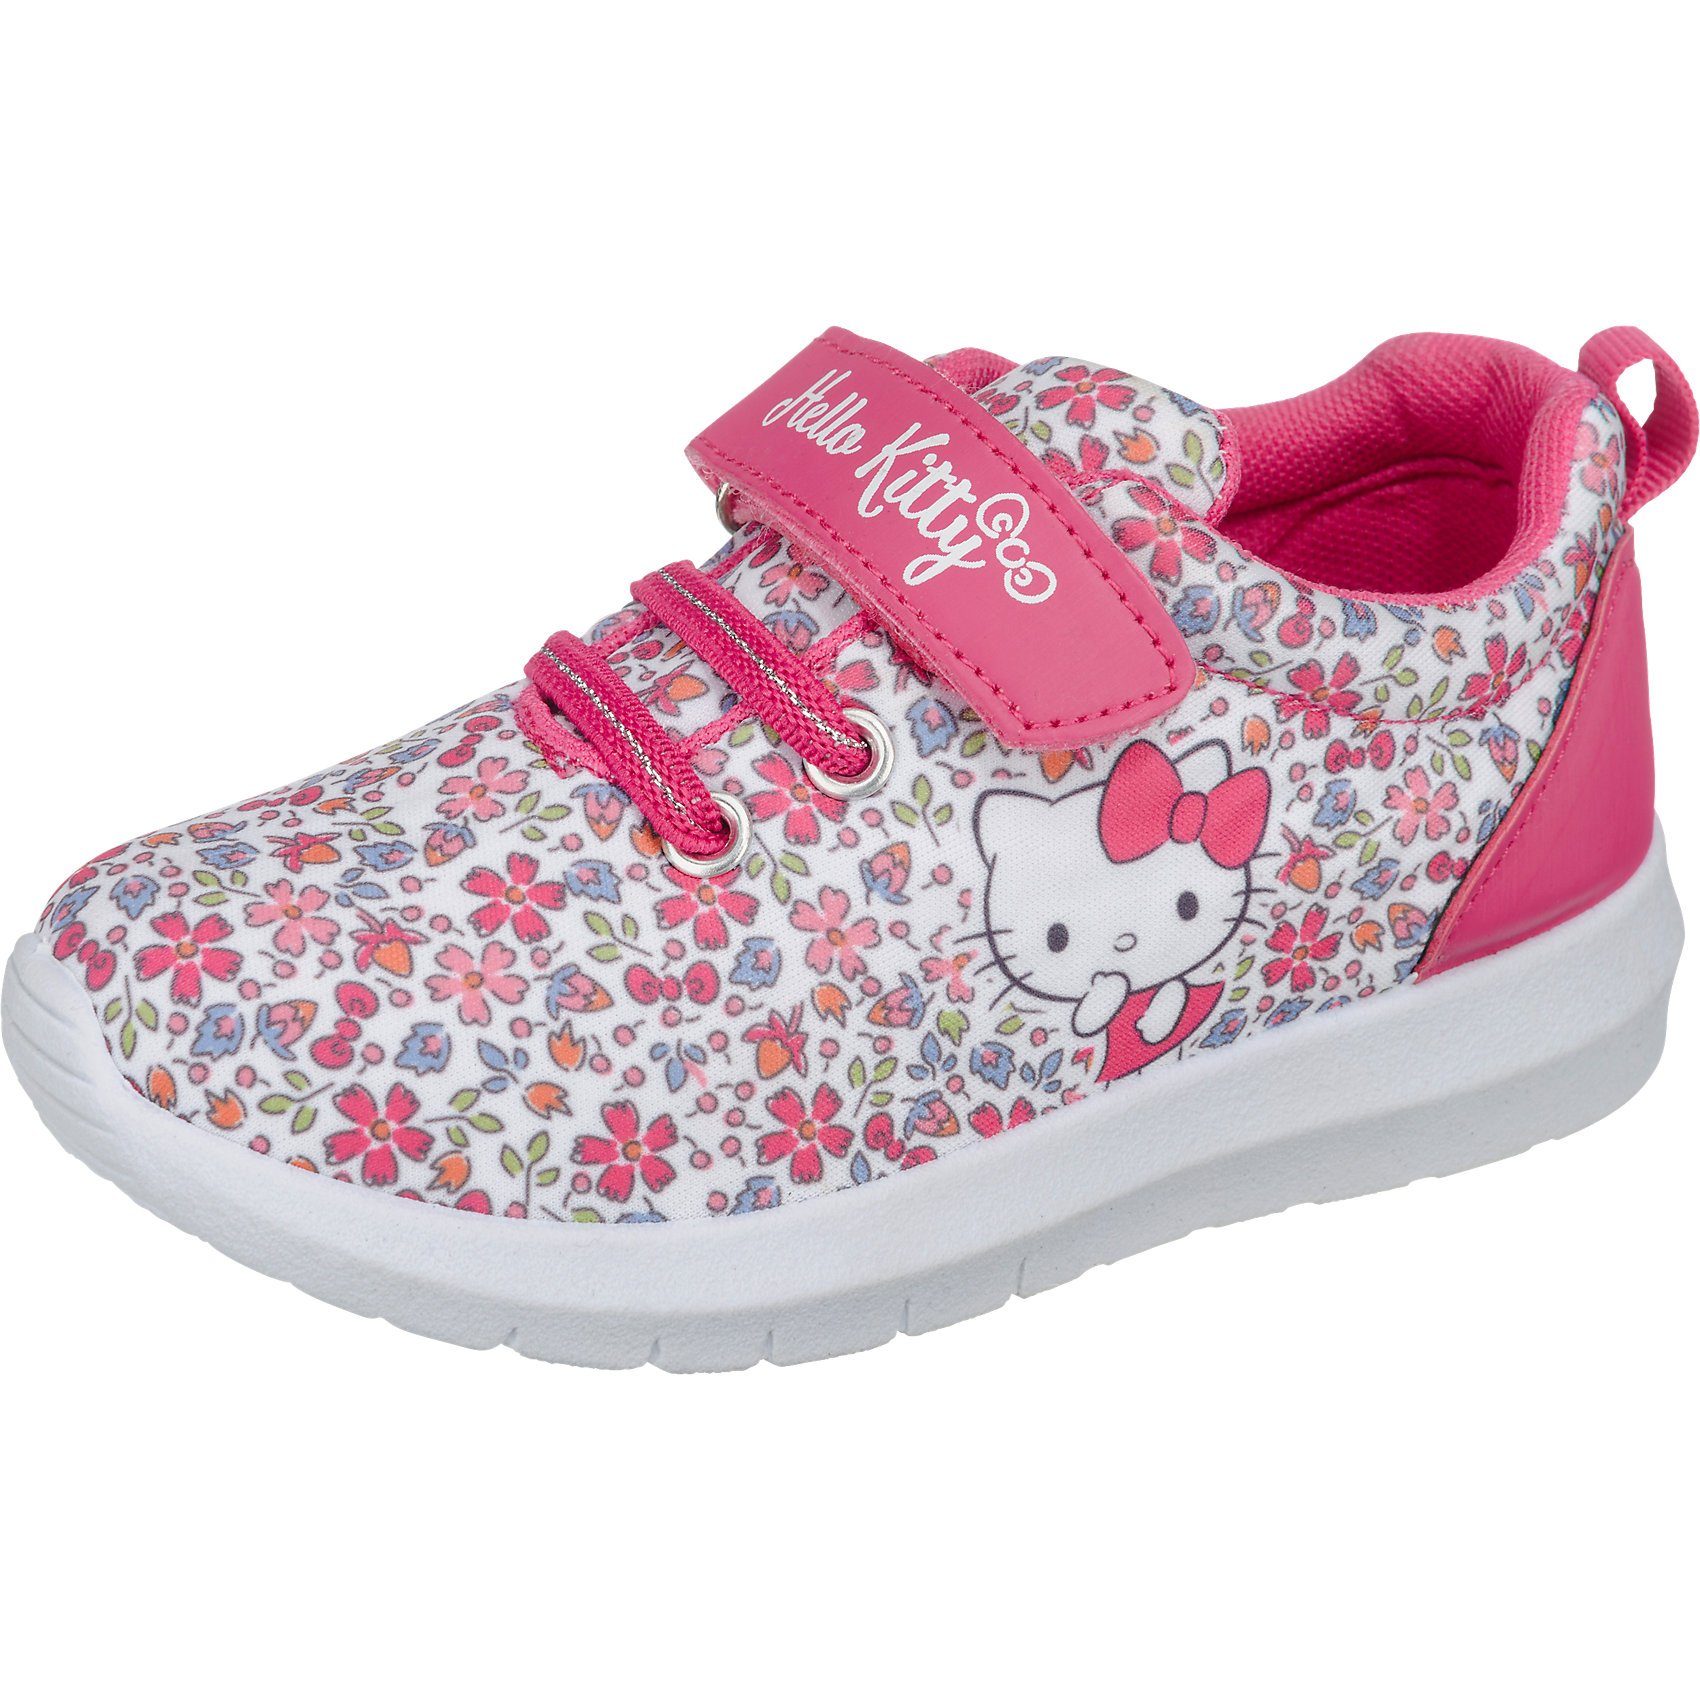  Hello Kitty Sneakers  Low f r M dchen Obermaterial Textil 